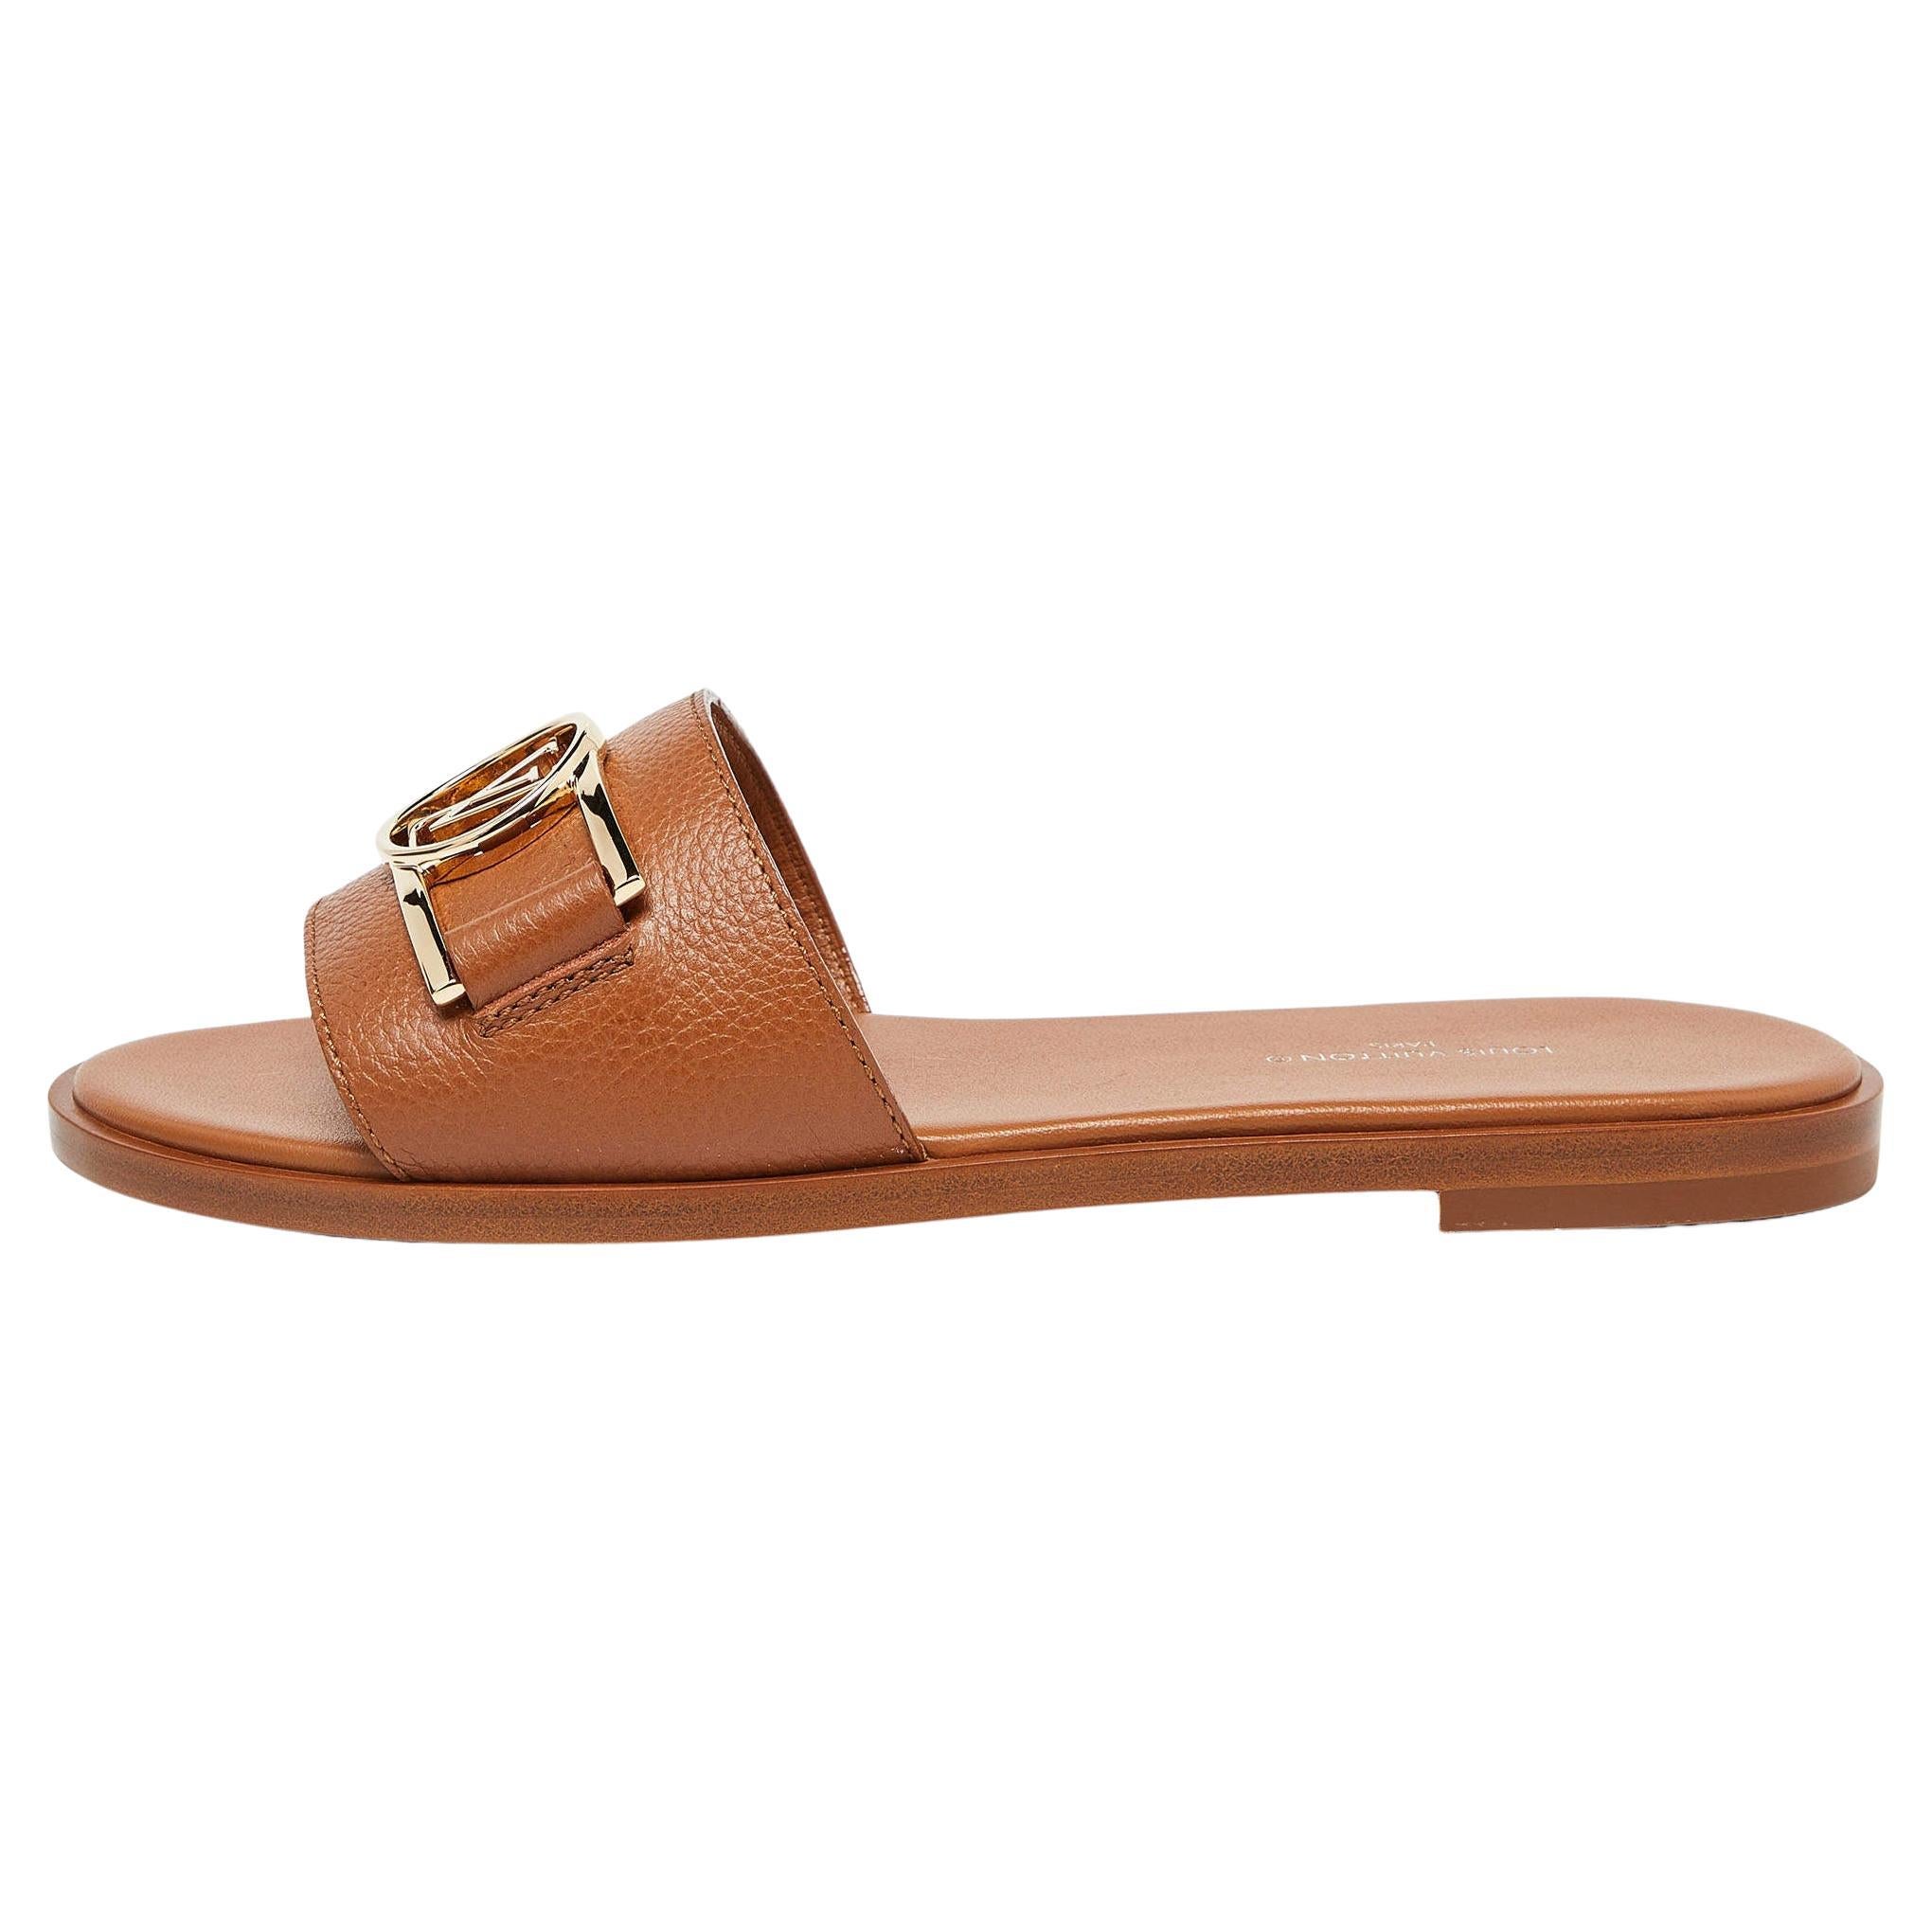 Ladies Comfort Leather Sandals, Style : Modern, Feature : Good Quality,  Comfortable at Rs 500 / Pair in Kolkata